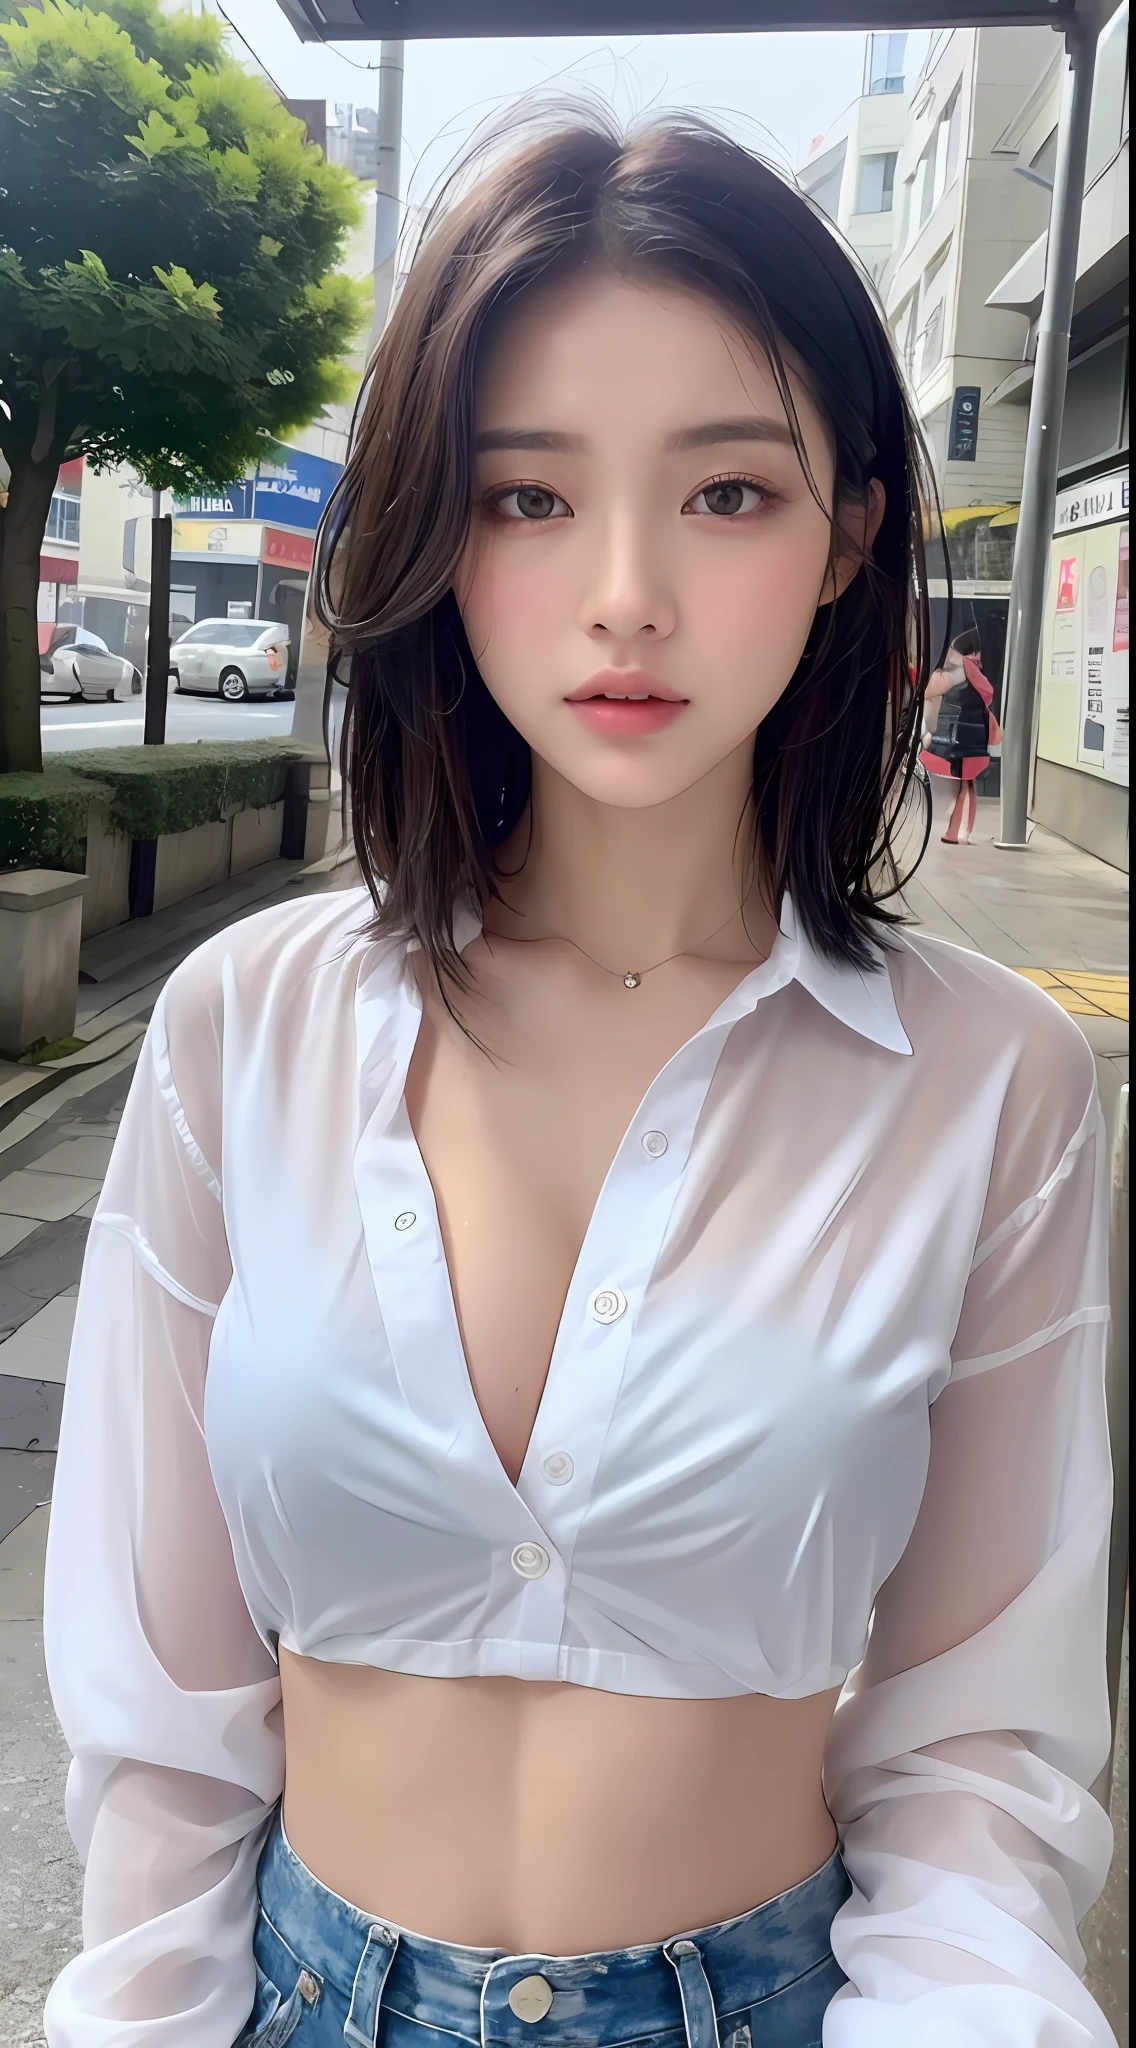 ((Best Quality, 8K, Masterpiece: 1.3)), Sharp: 1.2, Perfect Body Beauty: 1.4, Slim Abs: 1.2, ((Layered Hairstyle, Big Breasts: 1.2)), (Wet White Button Long Shirt: 1.1), (Rain, Street: 1.2), Wet: 1.5, Highly Detailed Face and Skin Texture, Detailed Eyes, Double Eyelids, Looking at the Camera